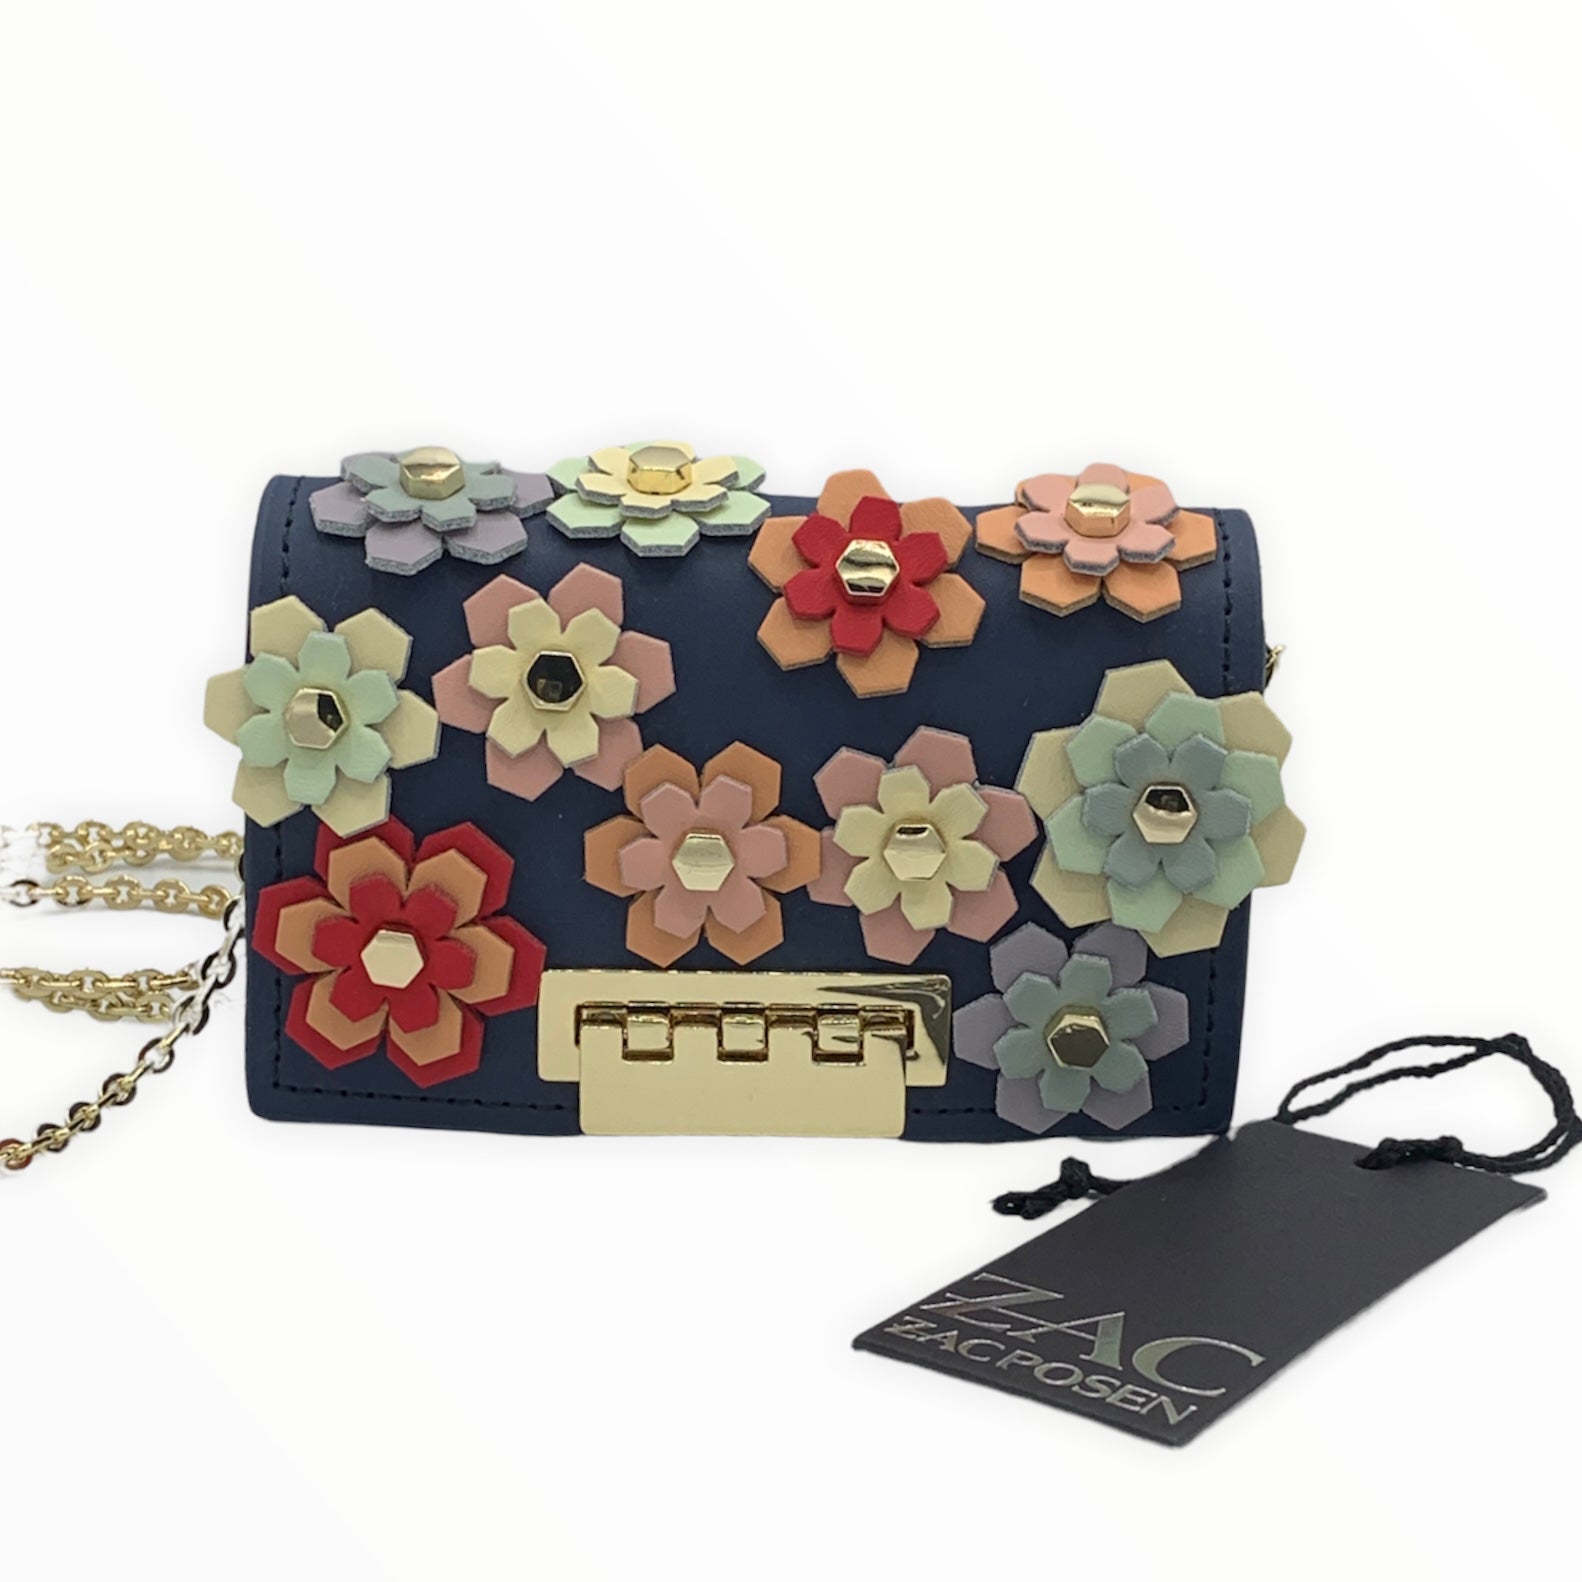 ZAC Zac Posen Earthette Leather Credit Card Case – Collections Couture